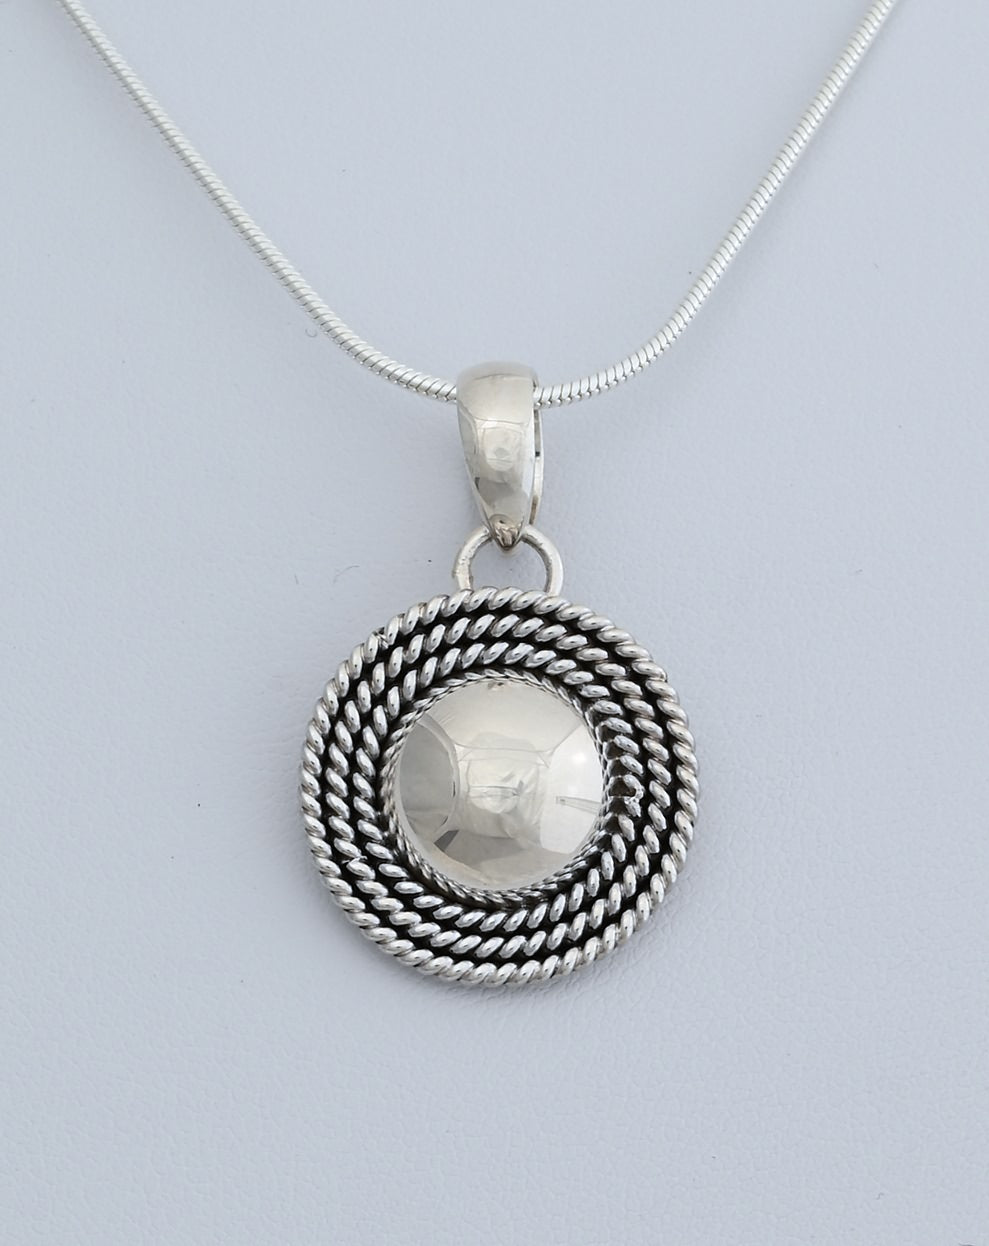 Pendant with Dome and Twists by Artie Yellowhorse